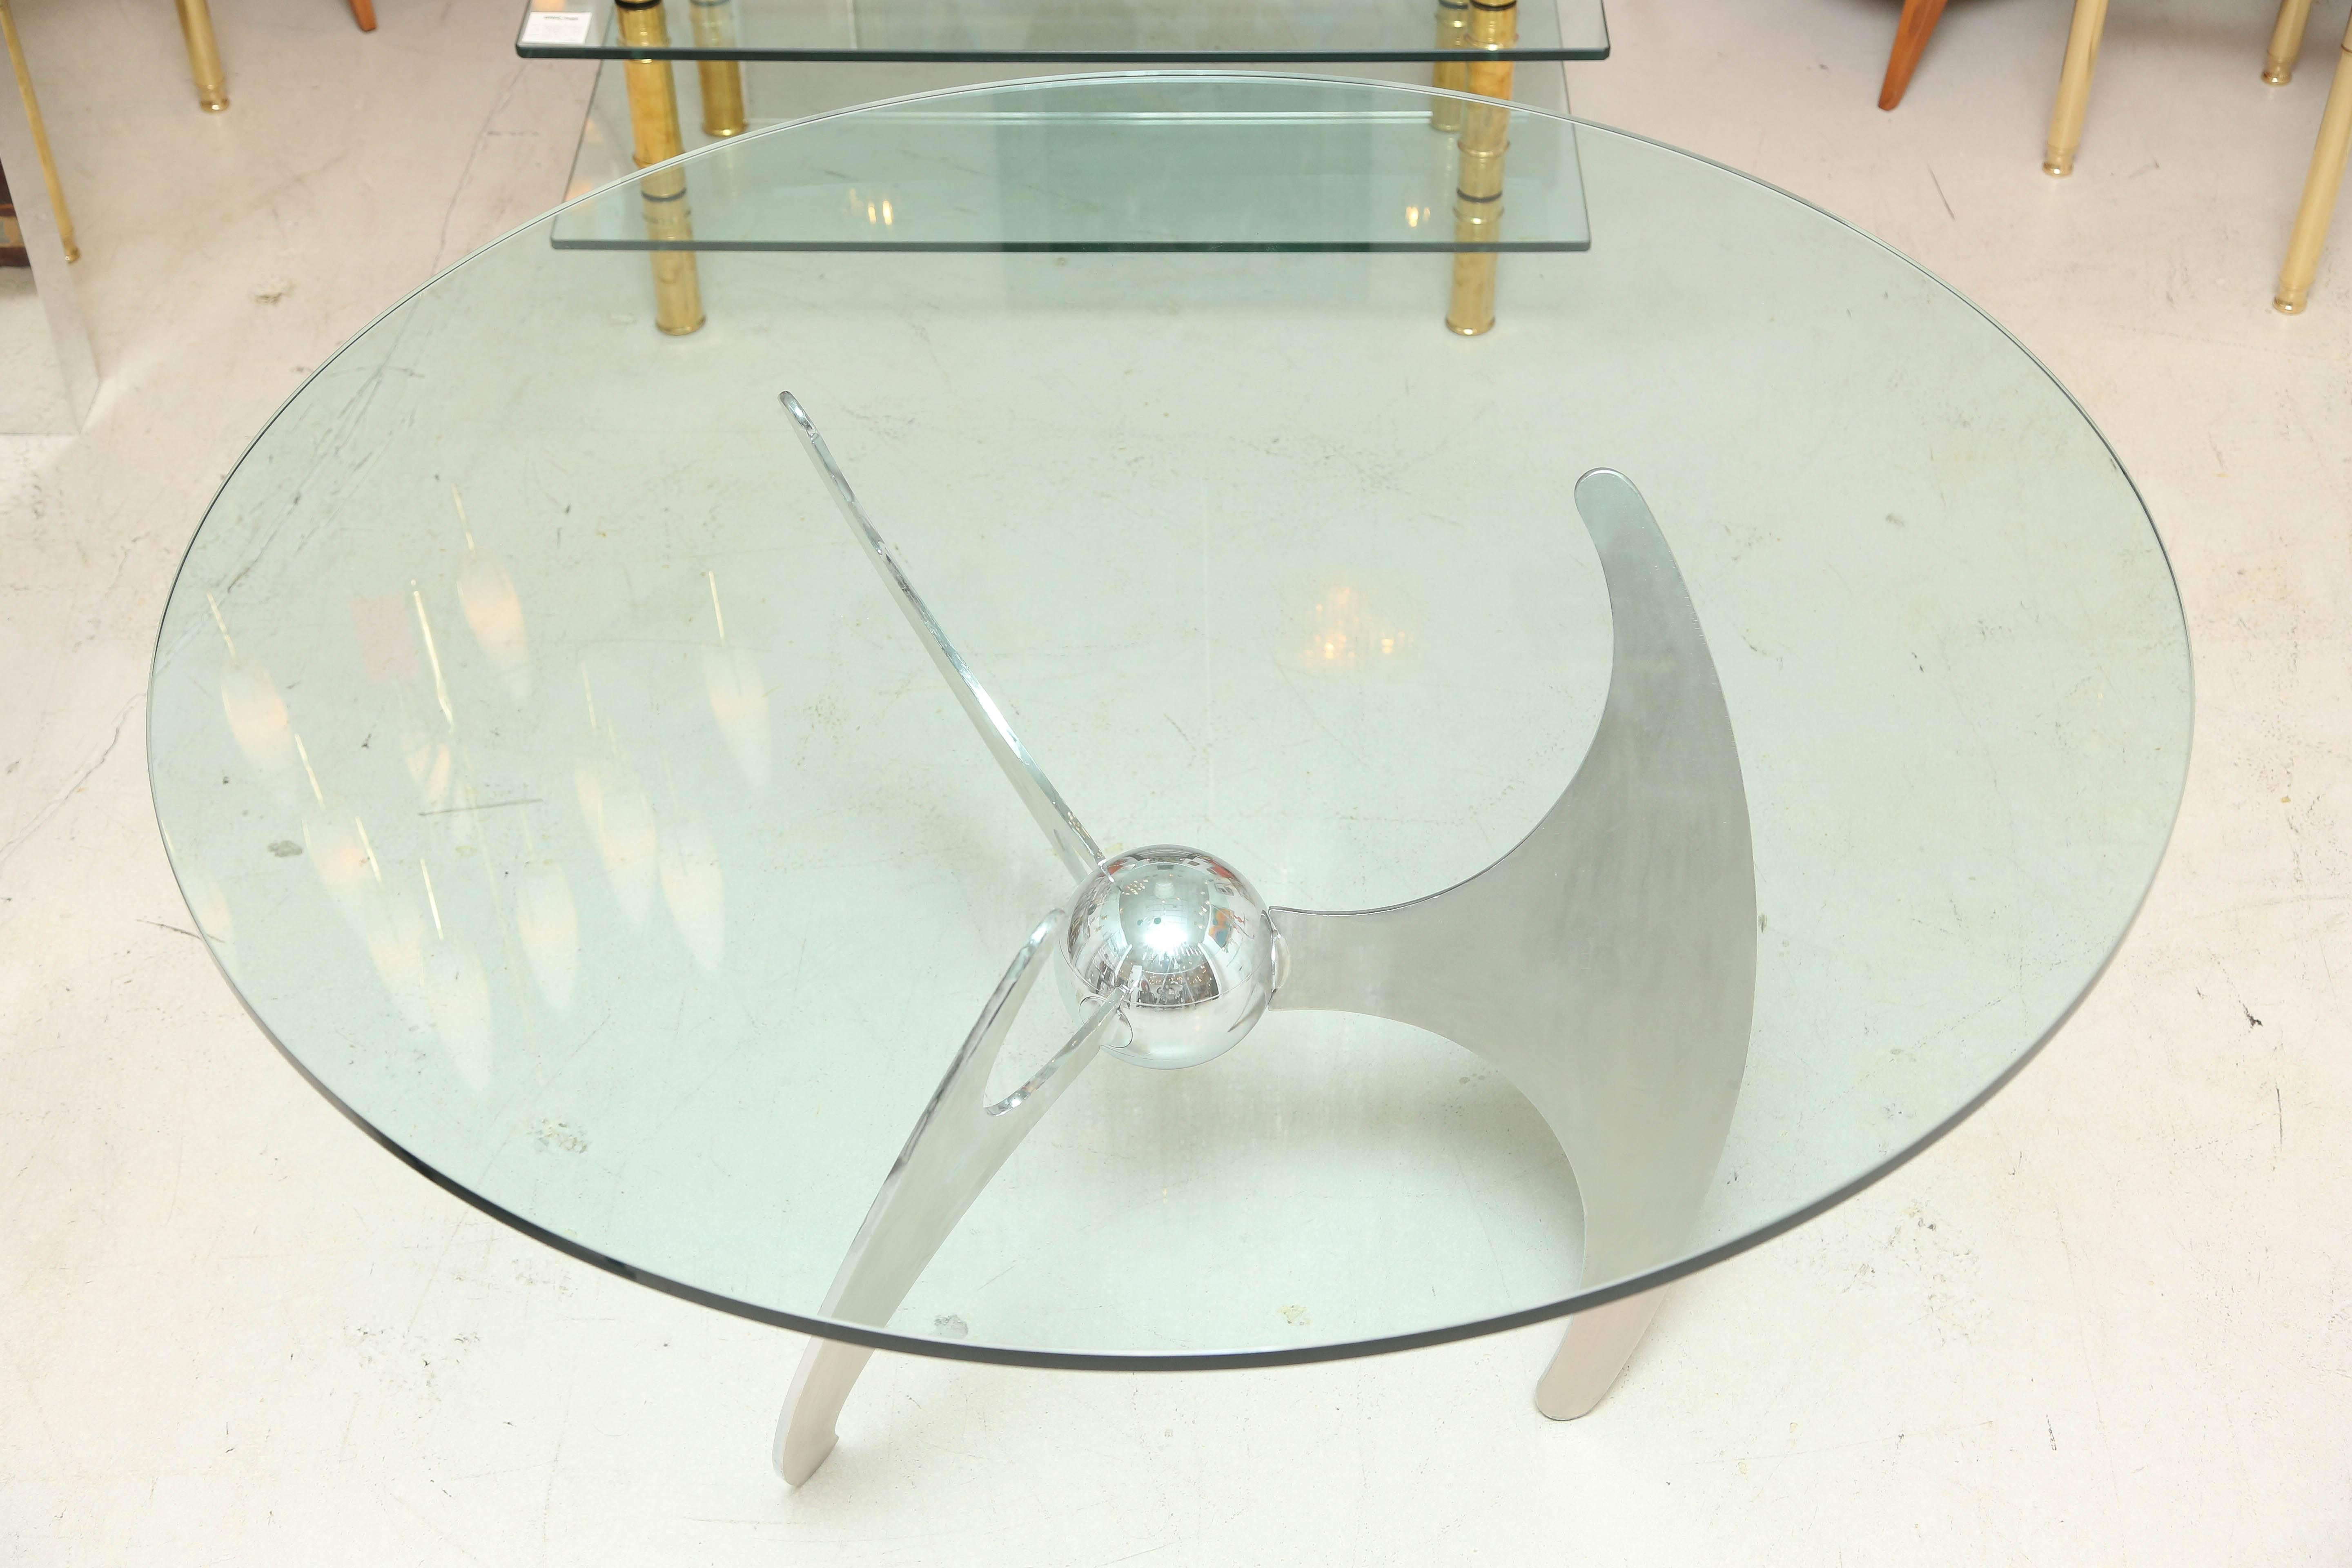 Mechanical propeller table designed by Luciano Campanini.
Can be a dining table: 31